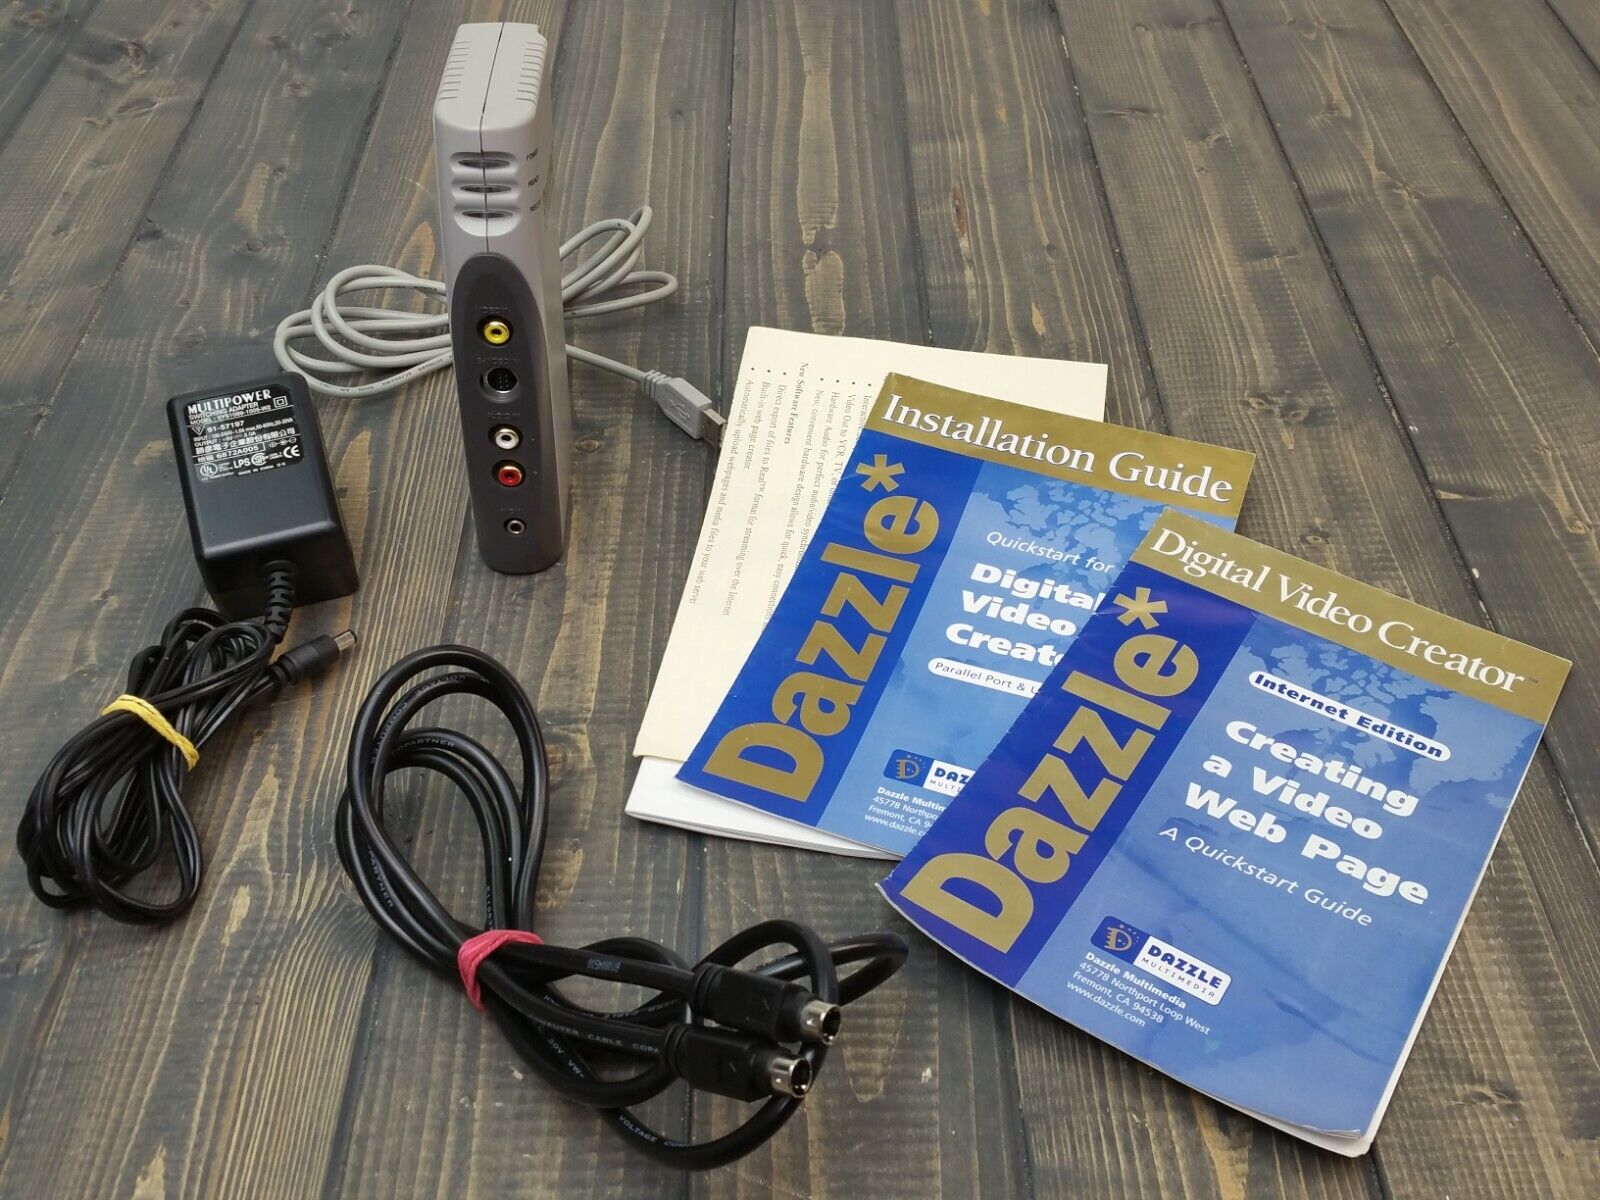 DAZZLE DVC-USB DIGITAL VIDEO CREATOR w/ Power Cord and Cables